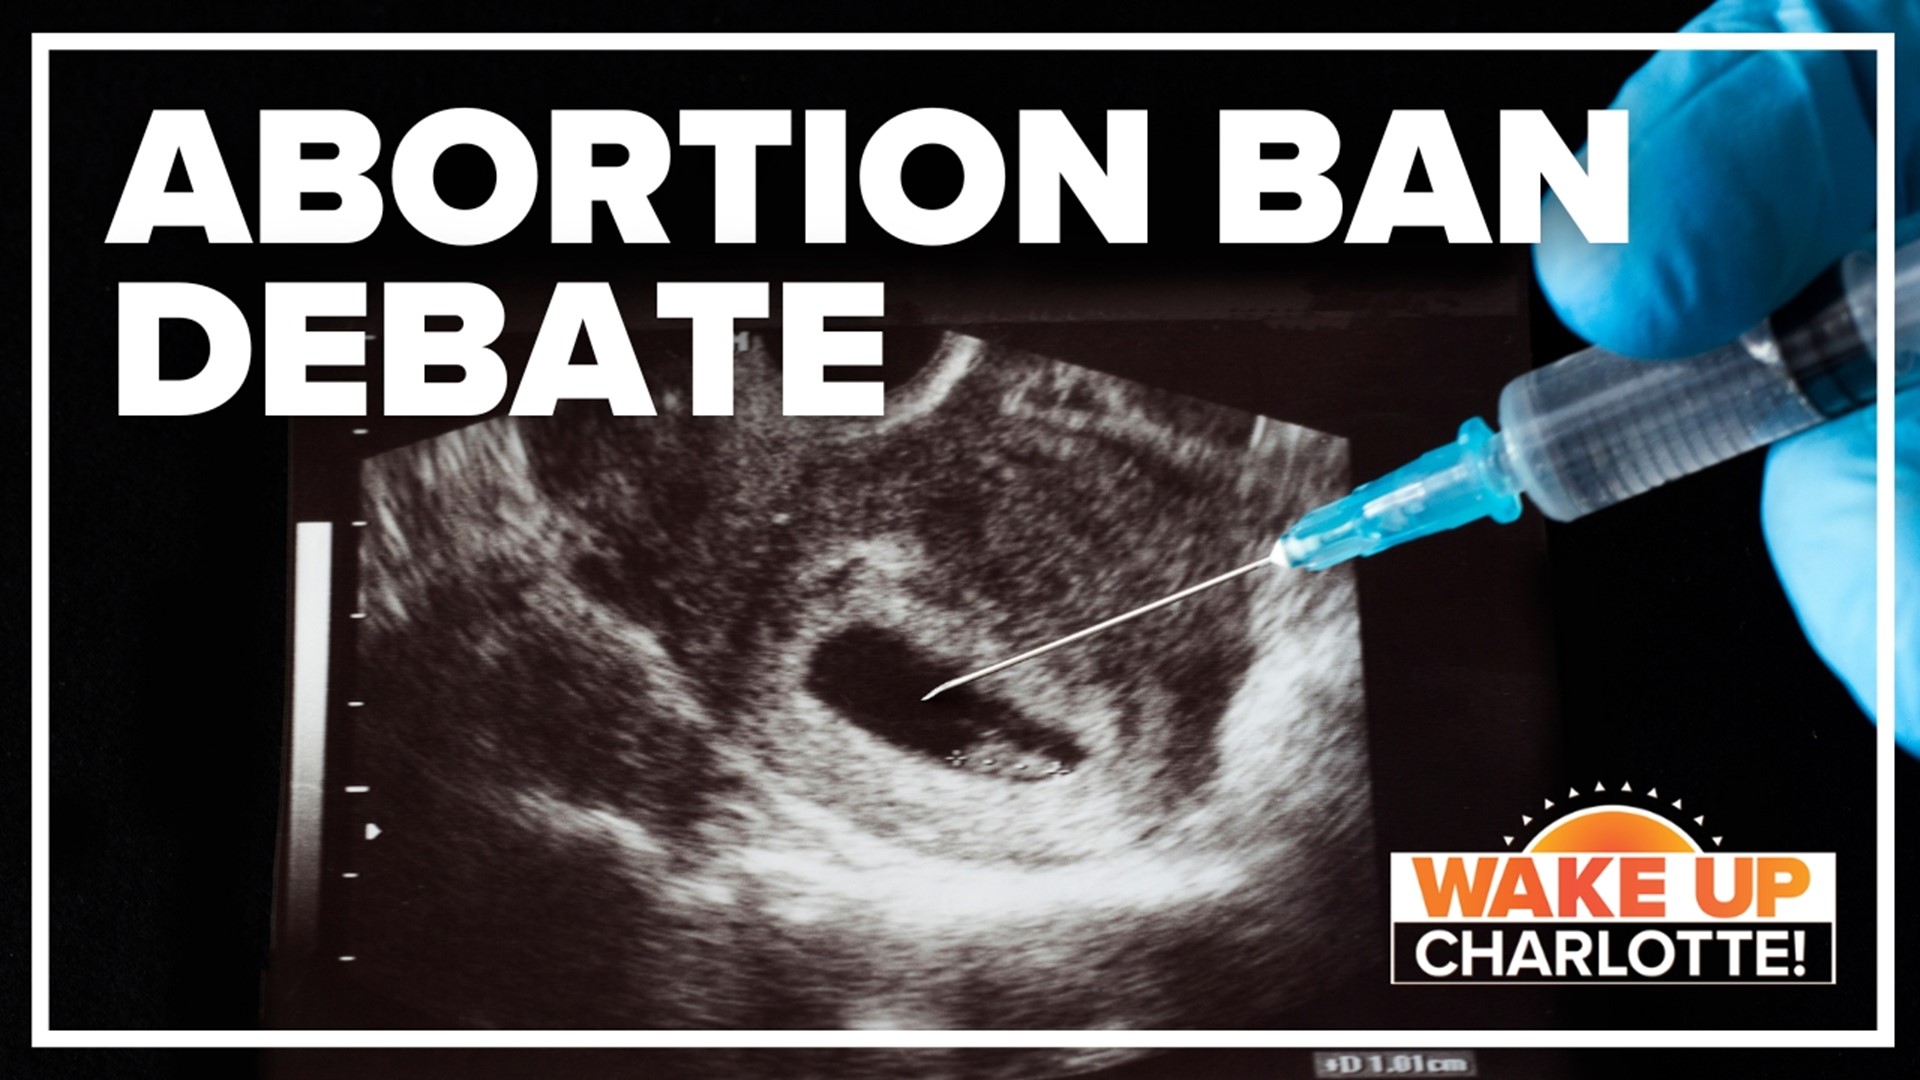 South Carolina continue to debate the abortion bill today.